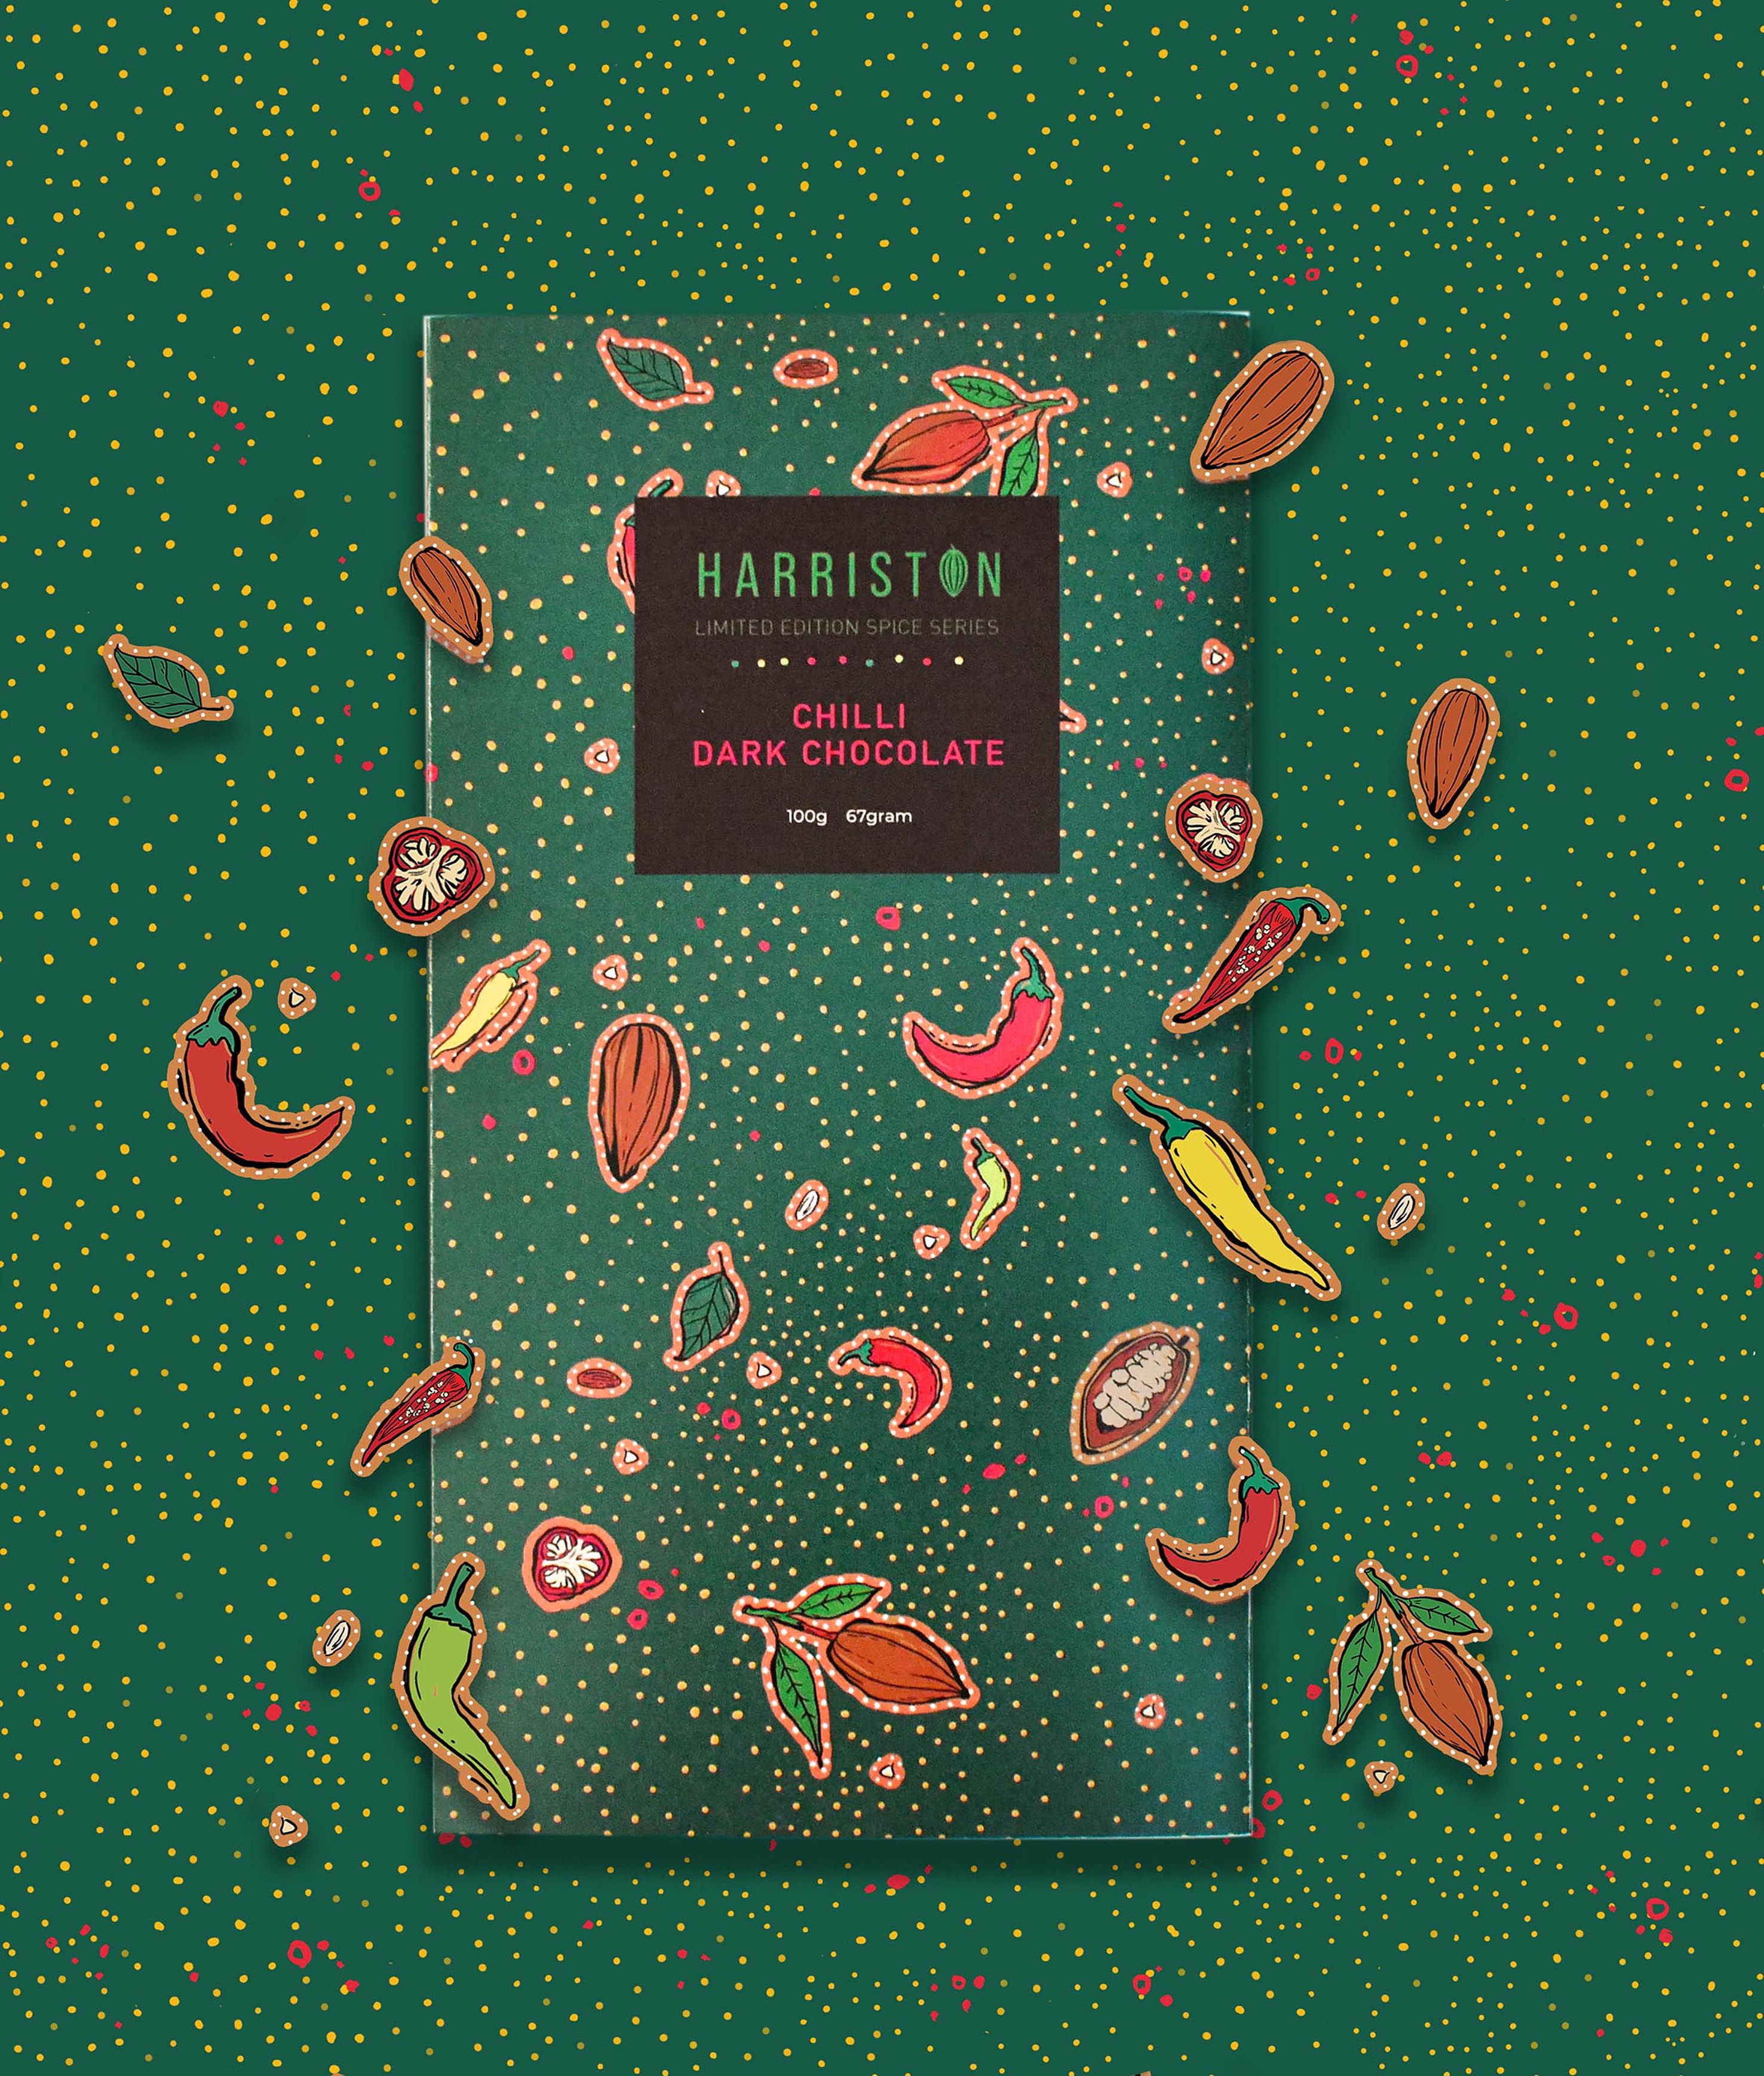 Student Creates a Limited Edition Packaging Design for Harriston Chocolates Spice Series